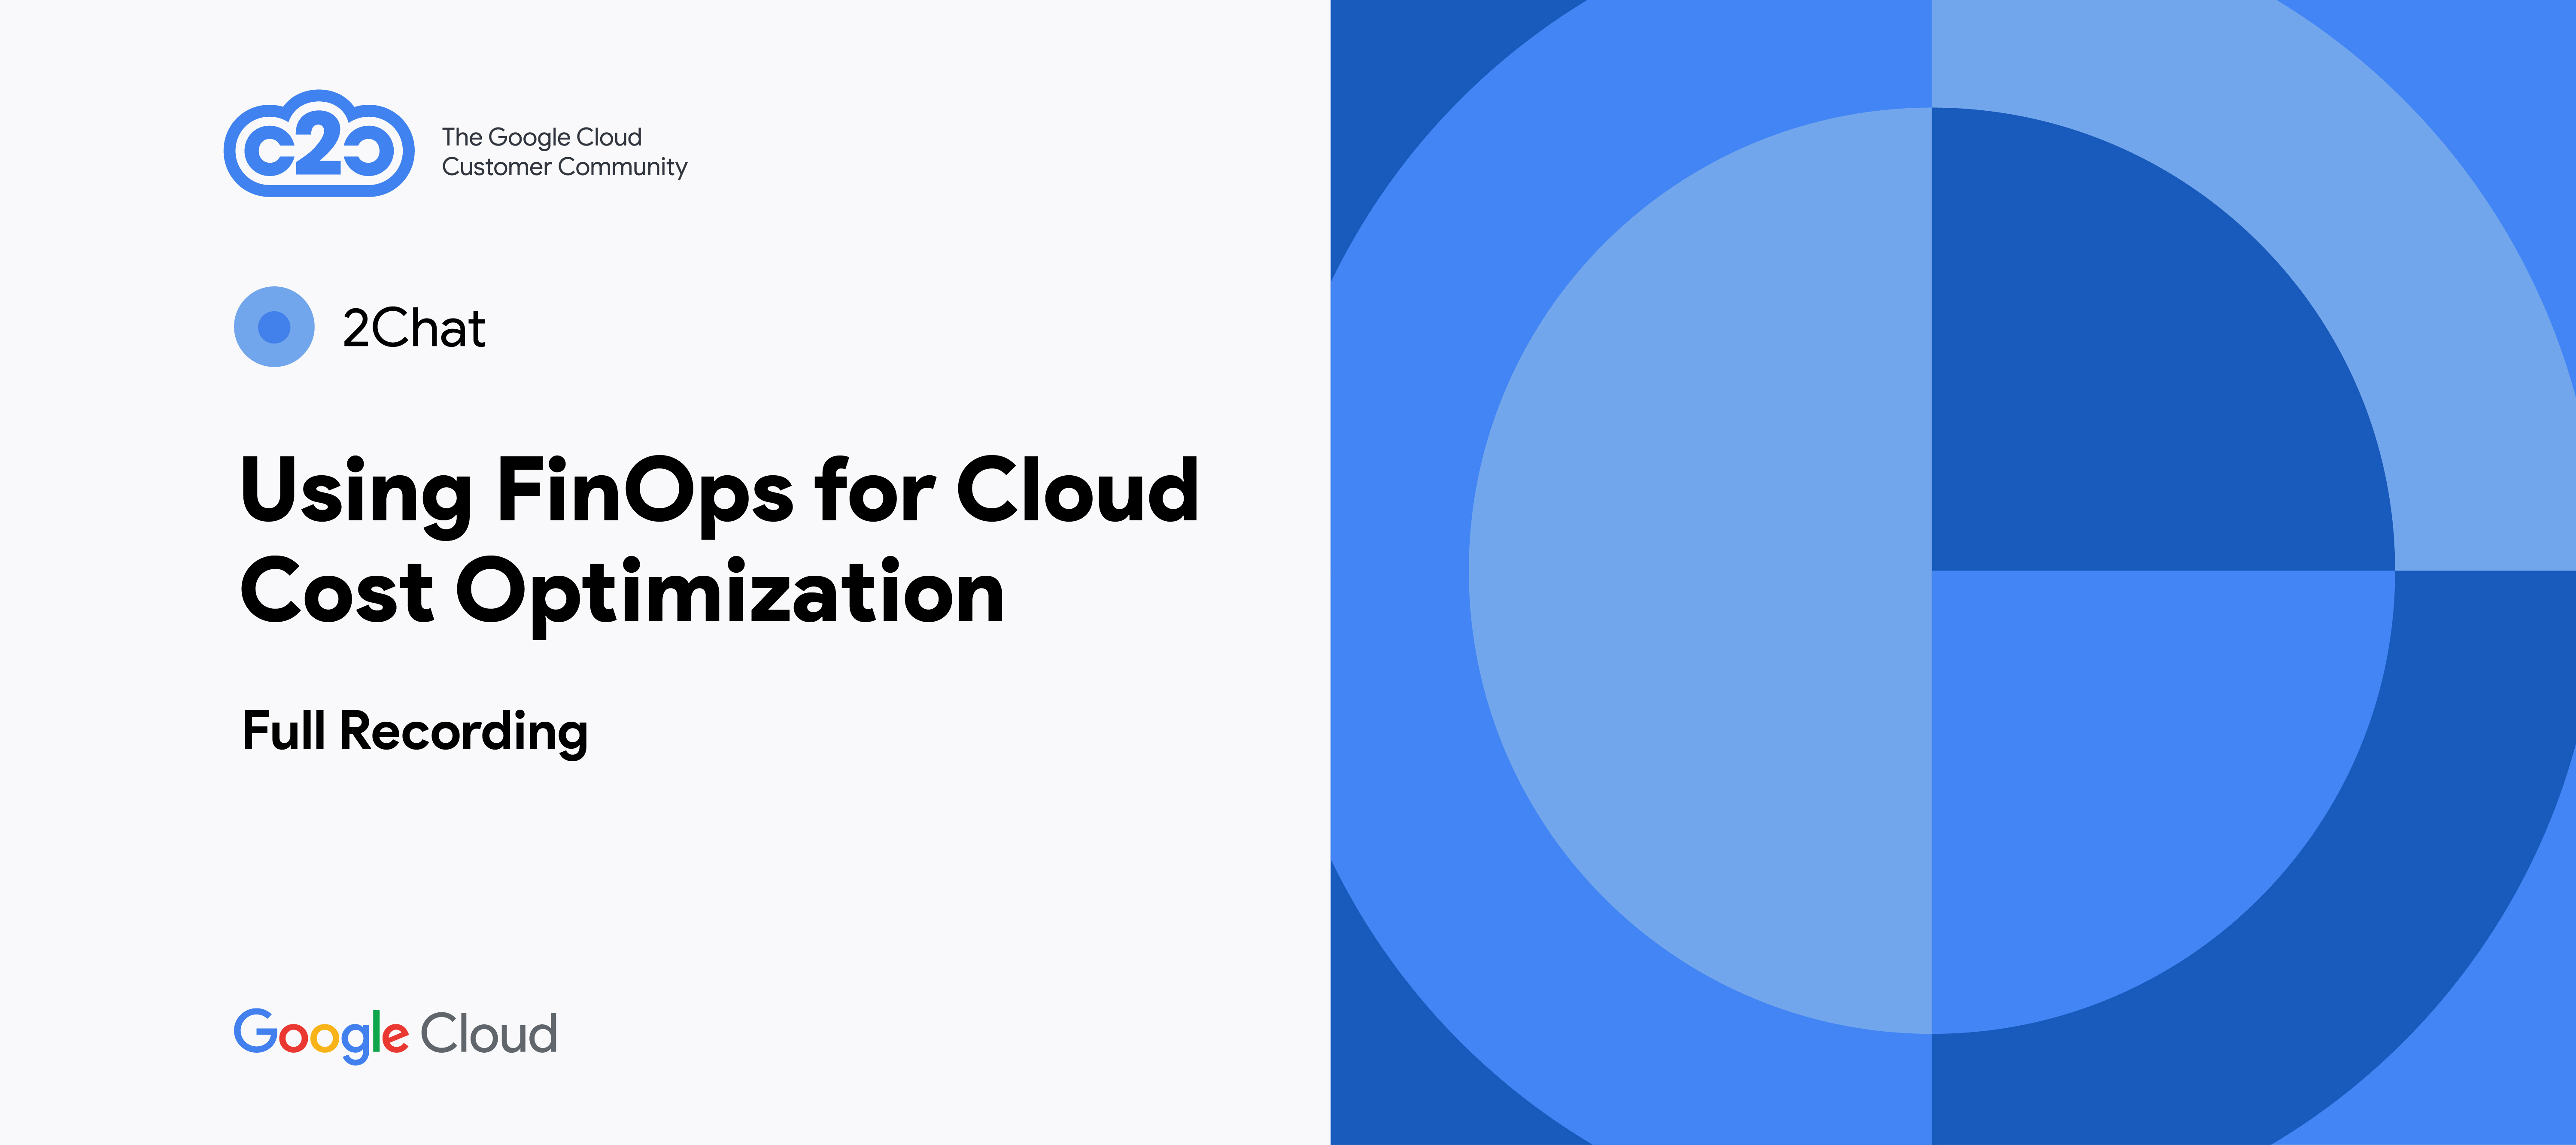 Using FinOps for Cloud Cost Optimization (full recording)